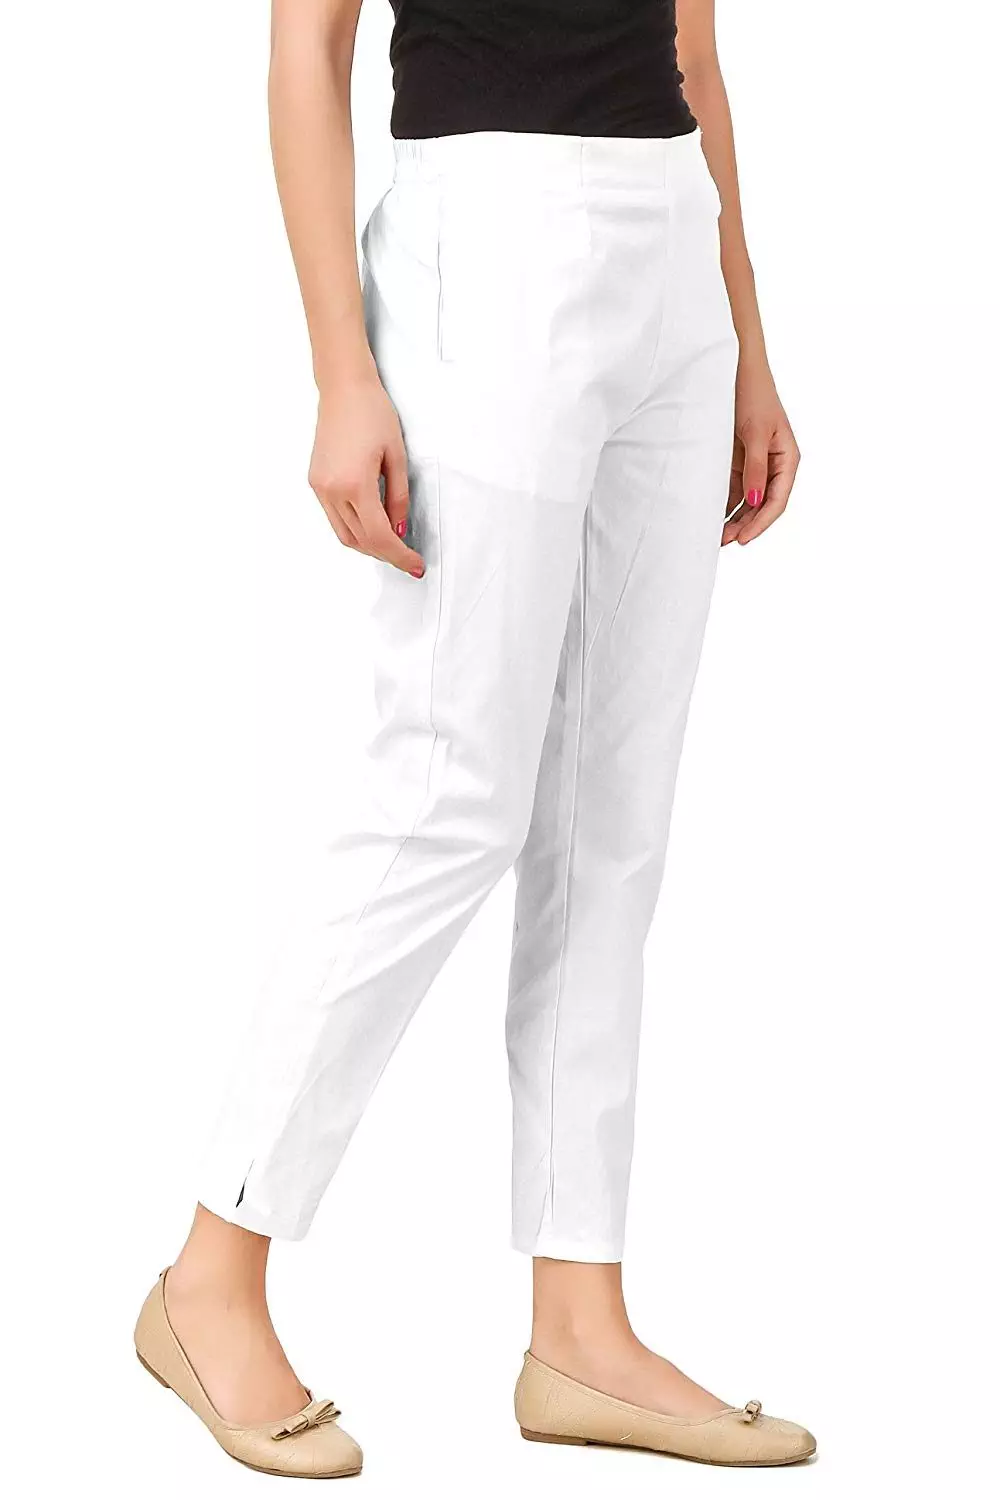 white trousers for women